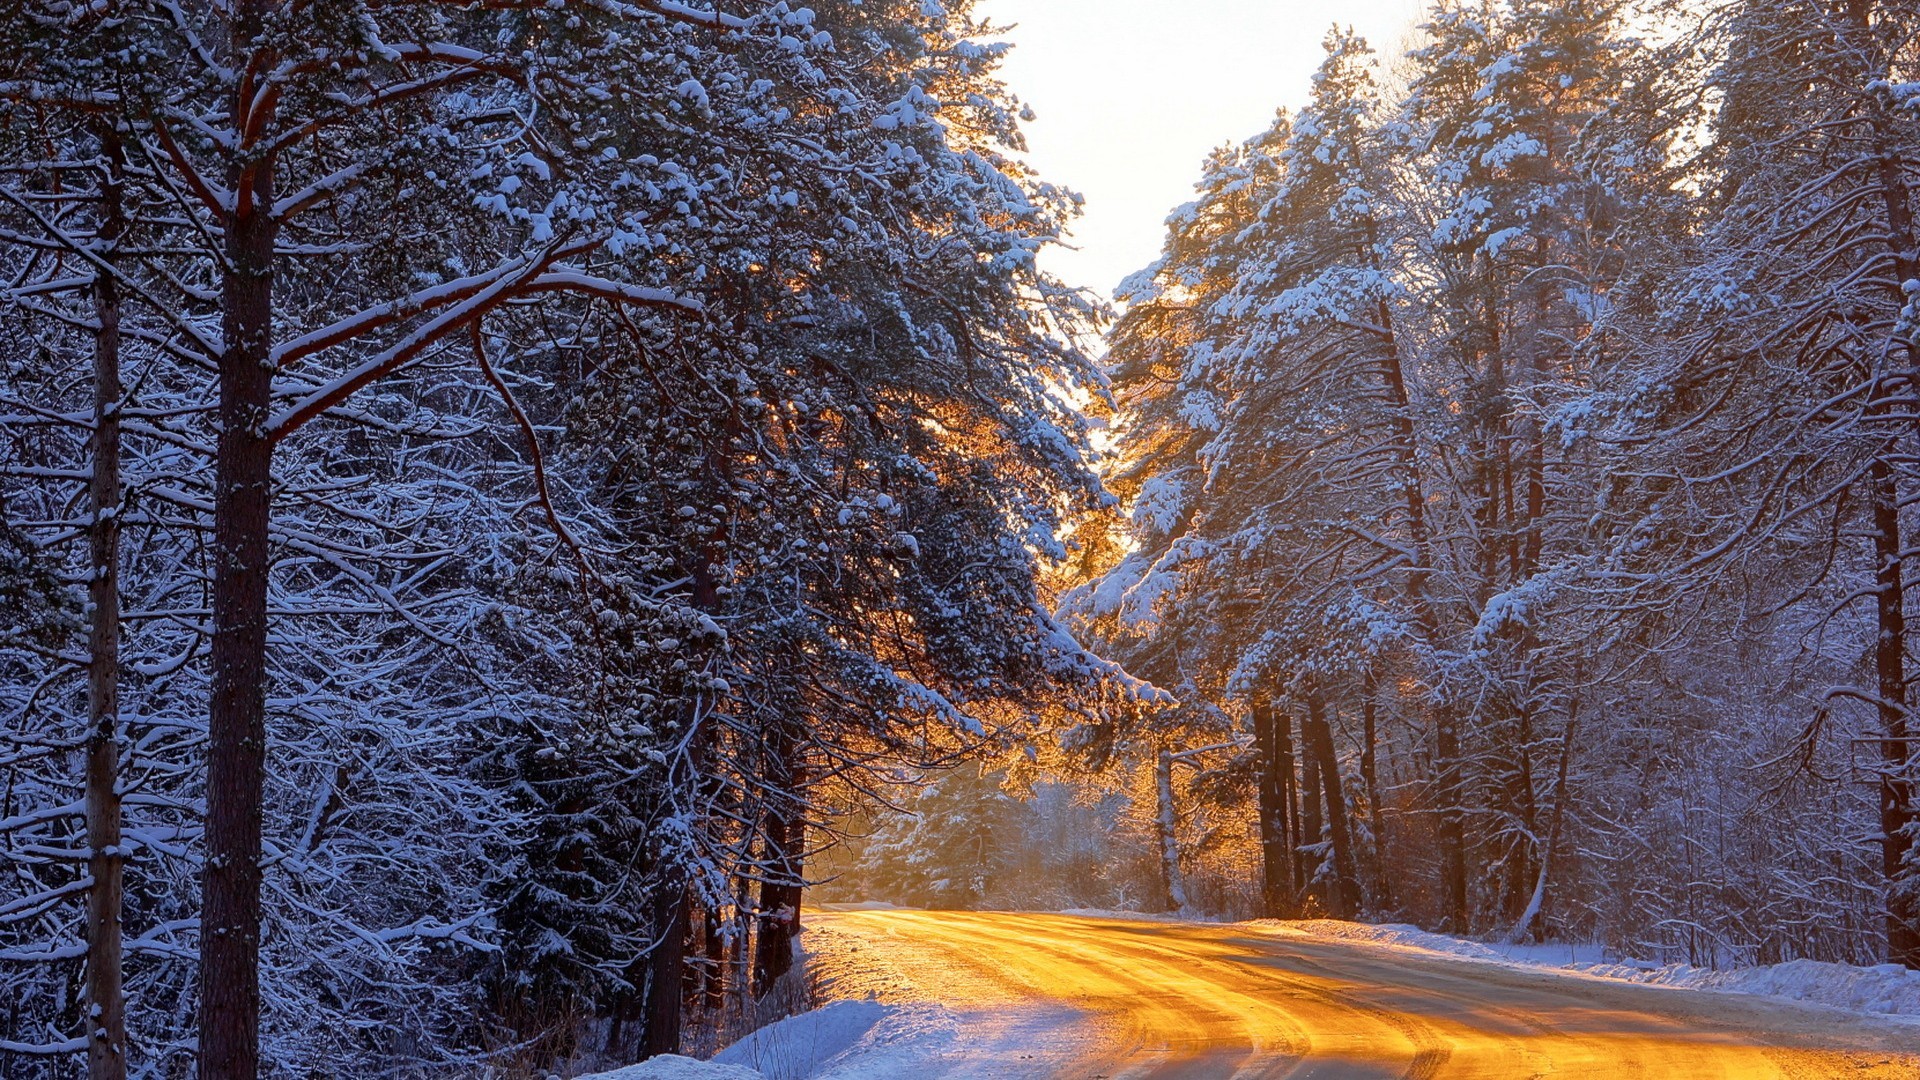 General 1920x1080 nature trees winter road frost snow outdoors cold ice